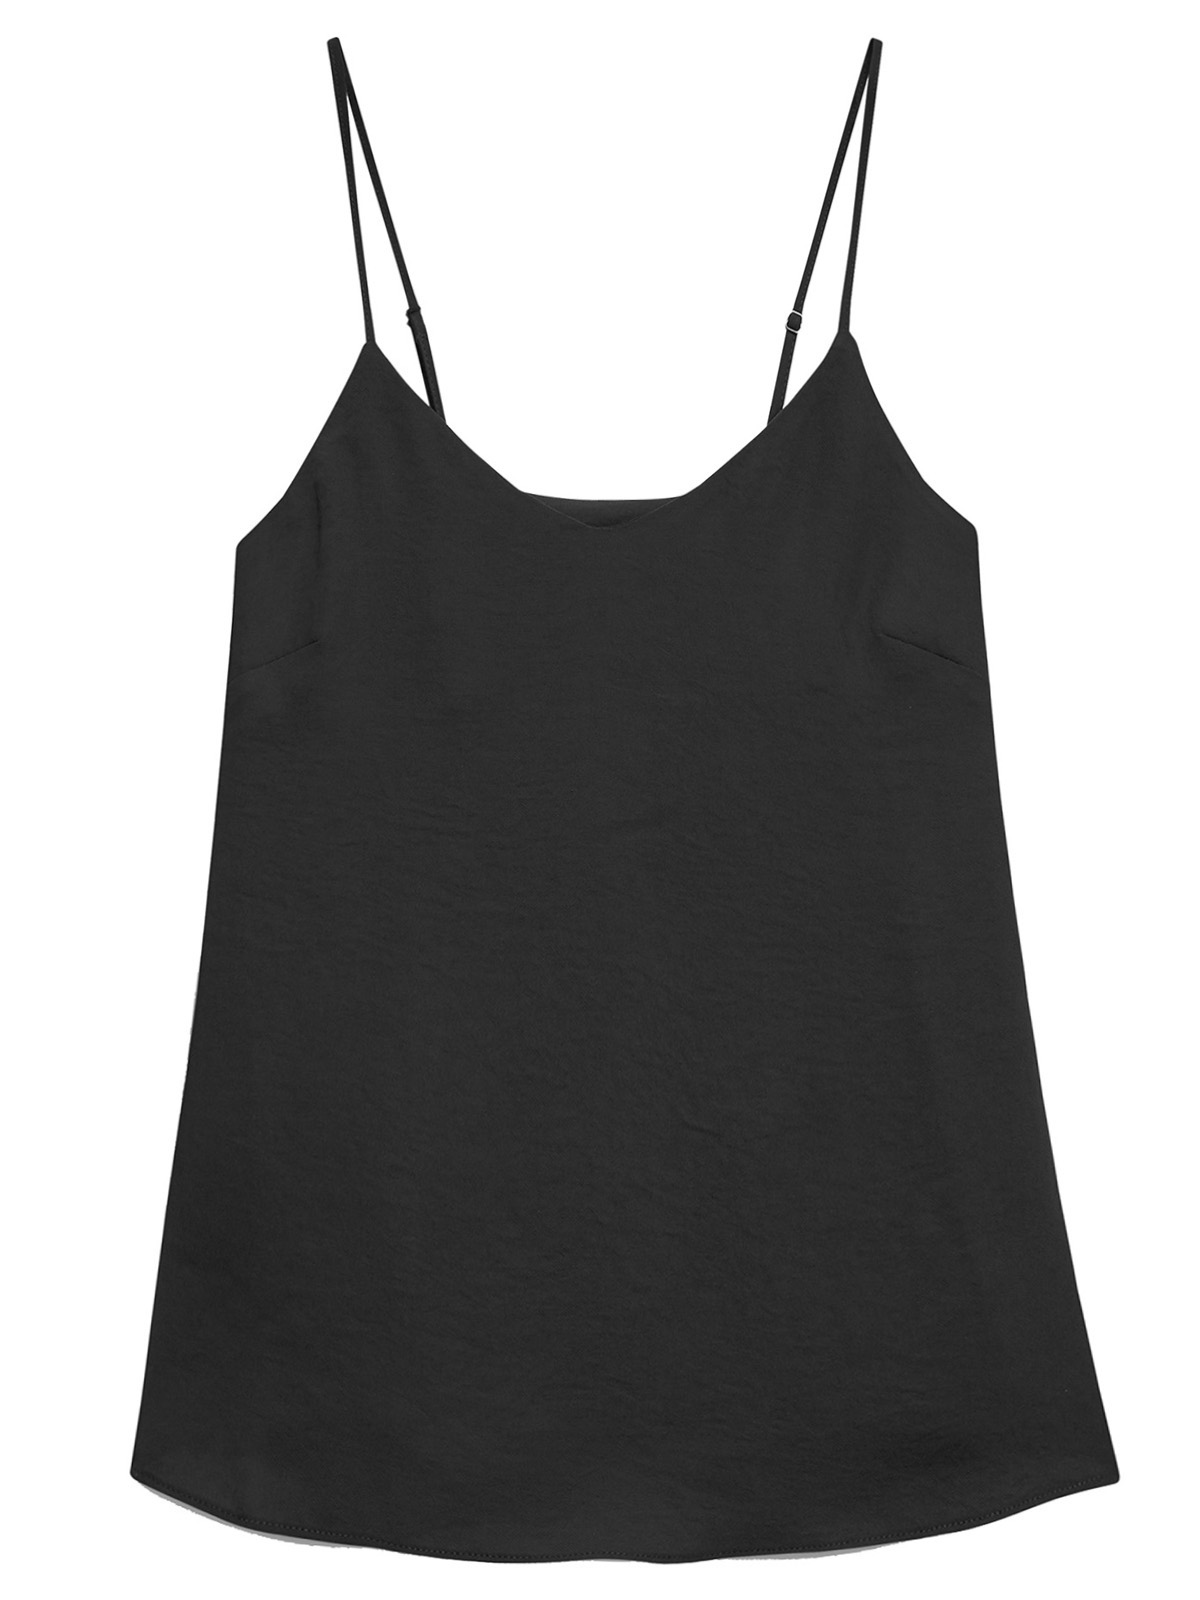 BLACK Strappy Cami Top - Size 6 to 22